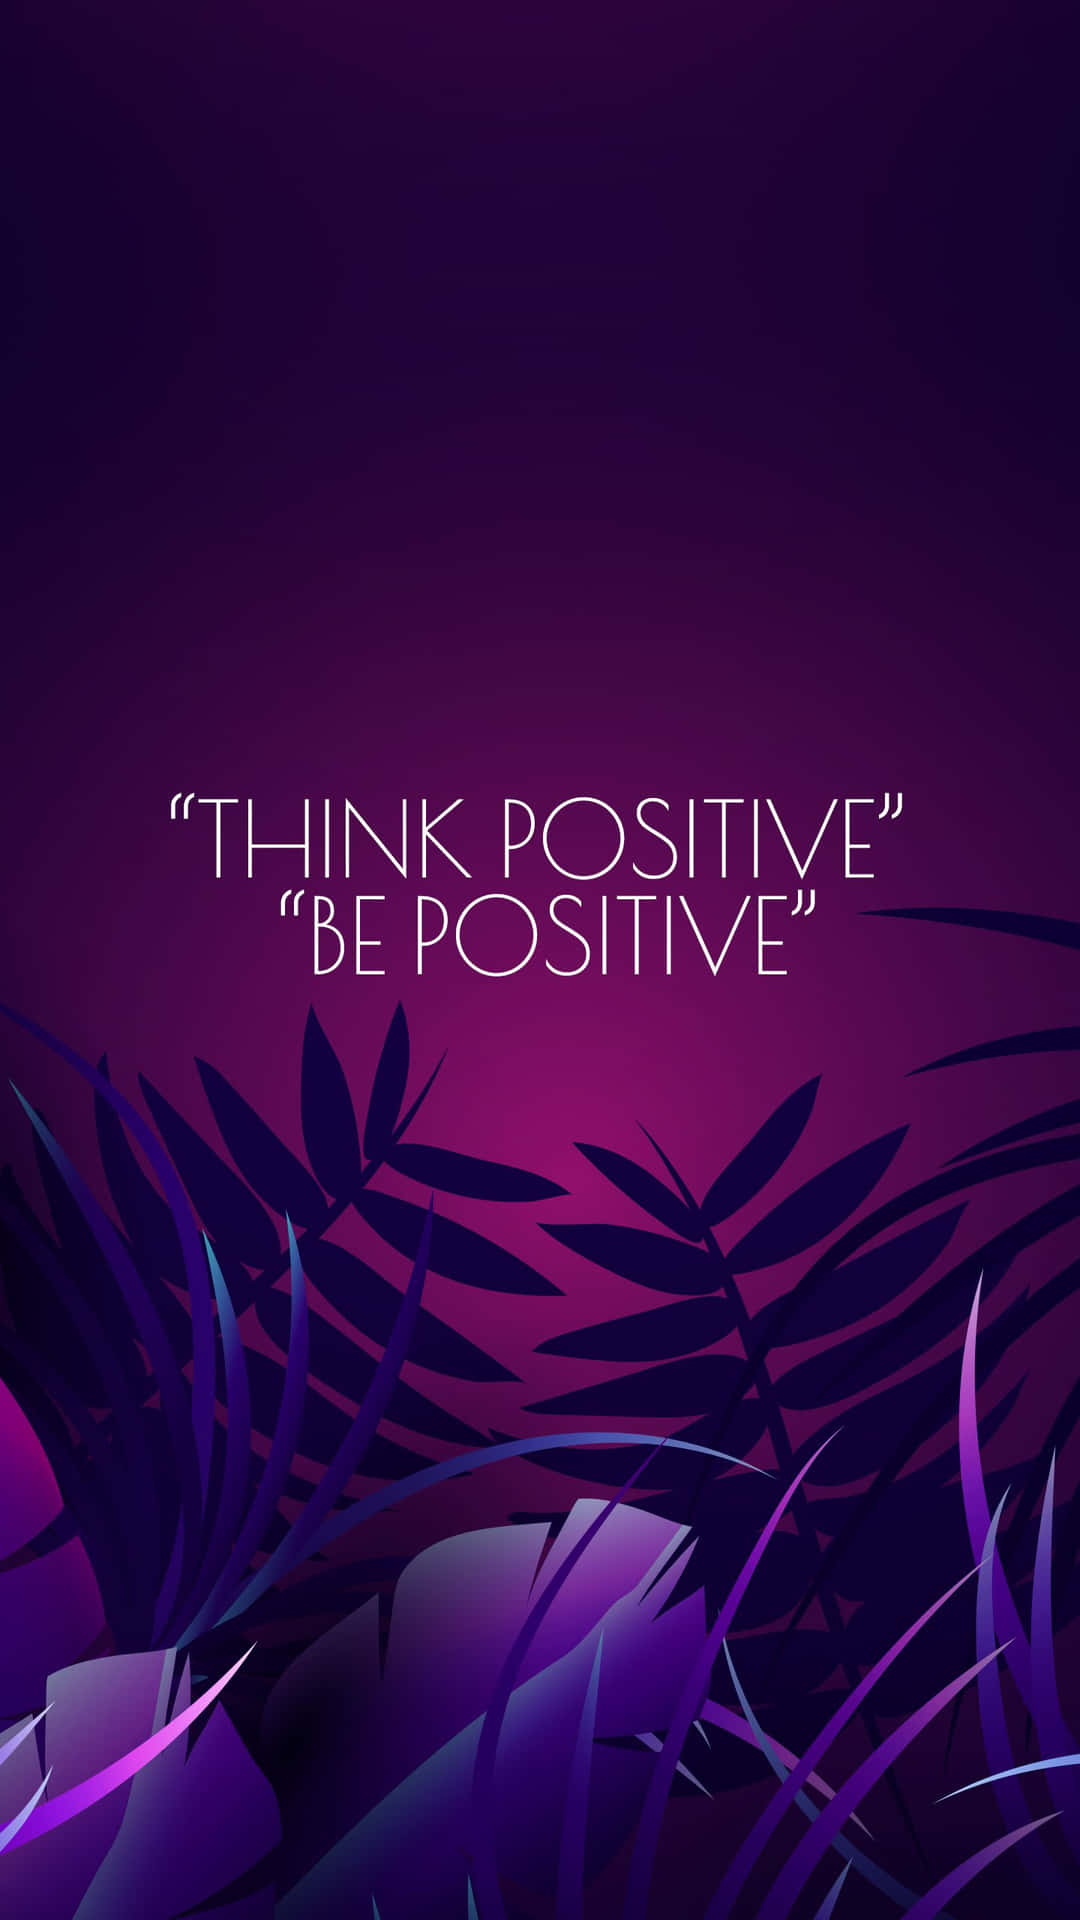 Don't let negativity affect your life. Stay positive! Wallpaper